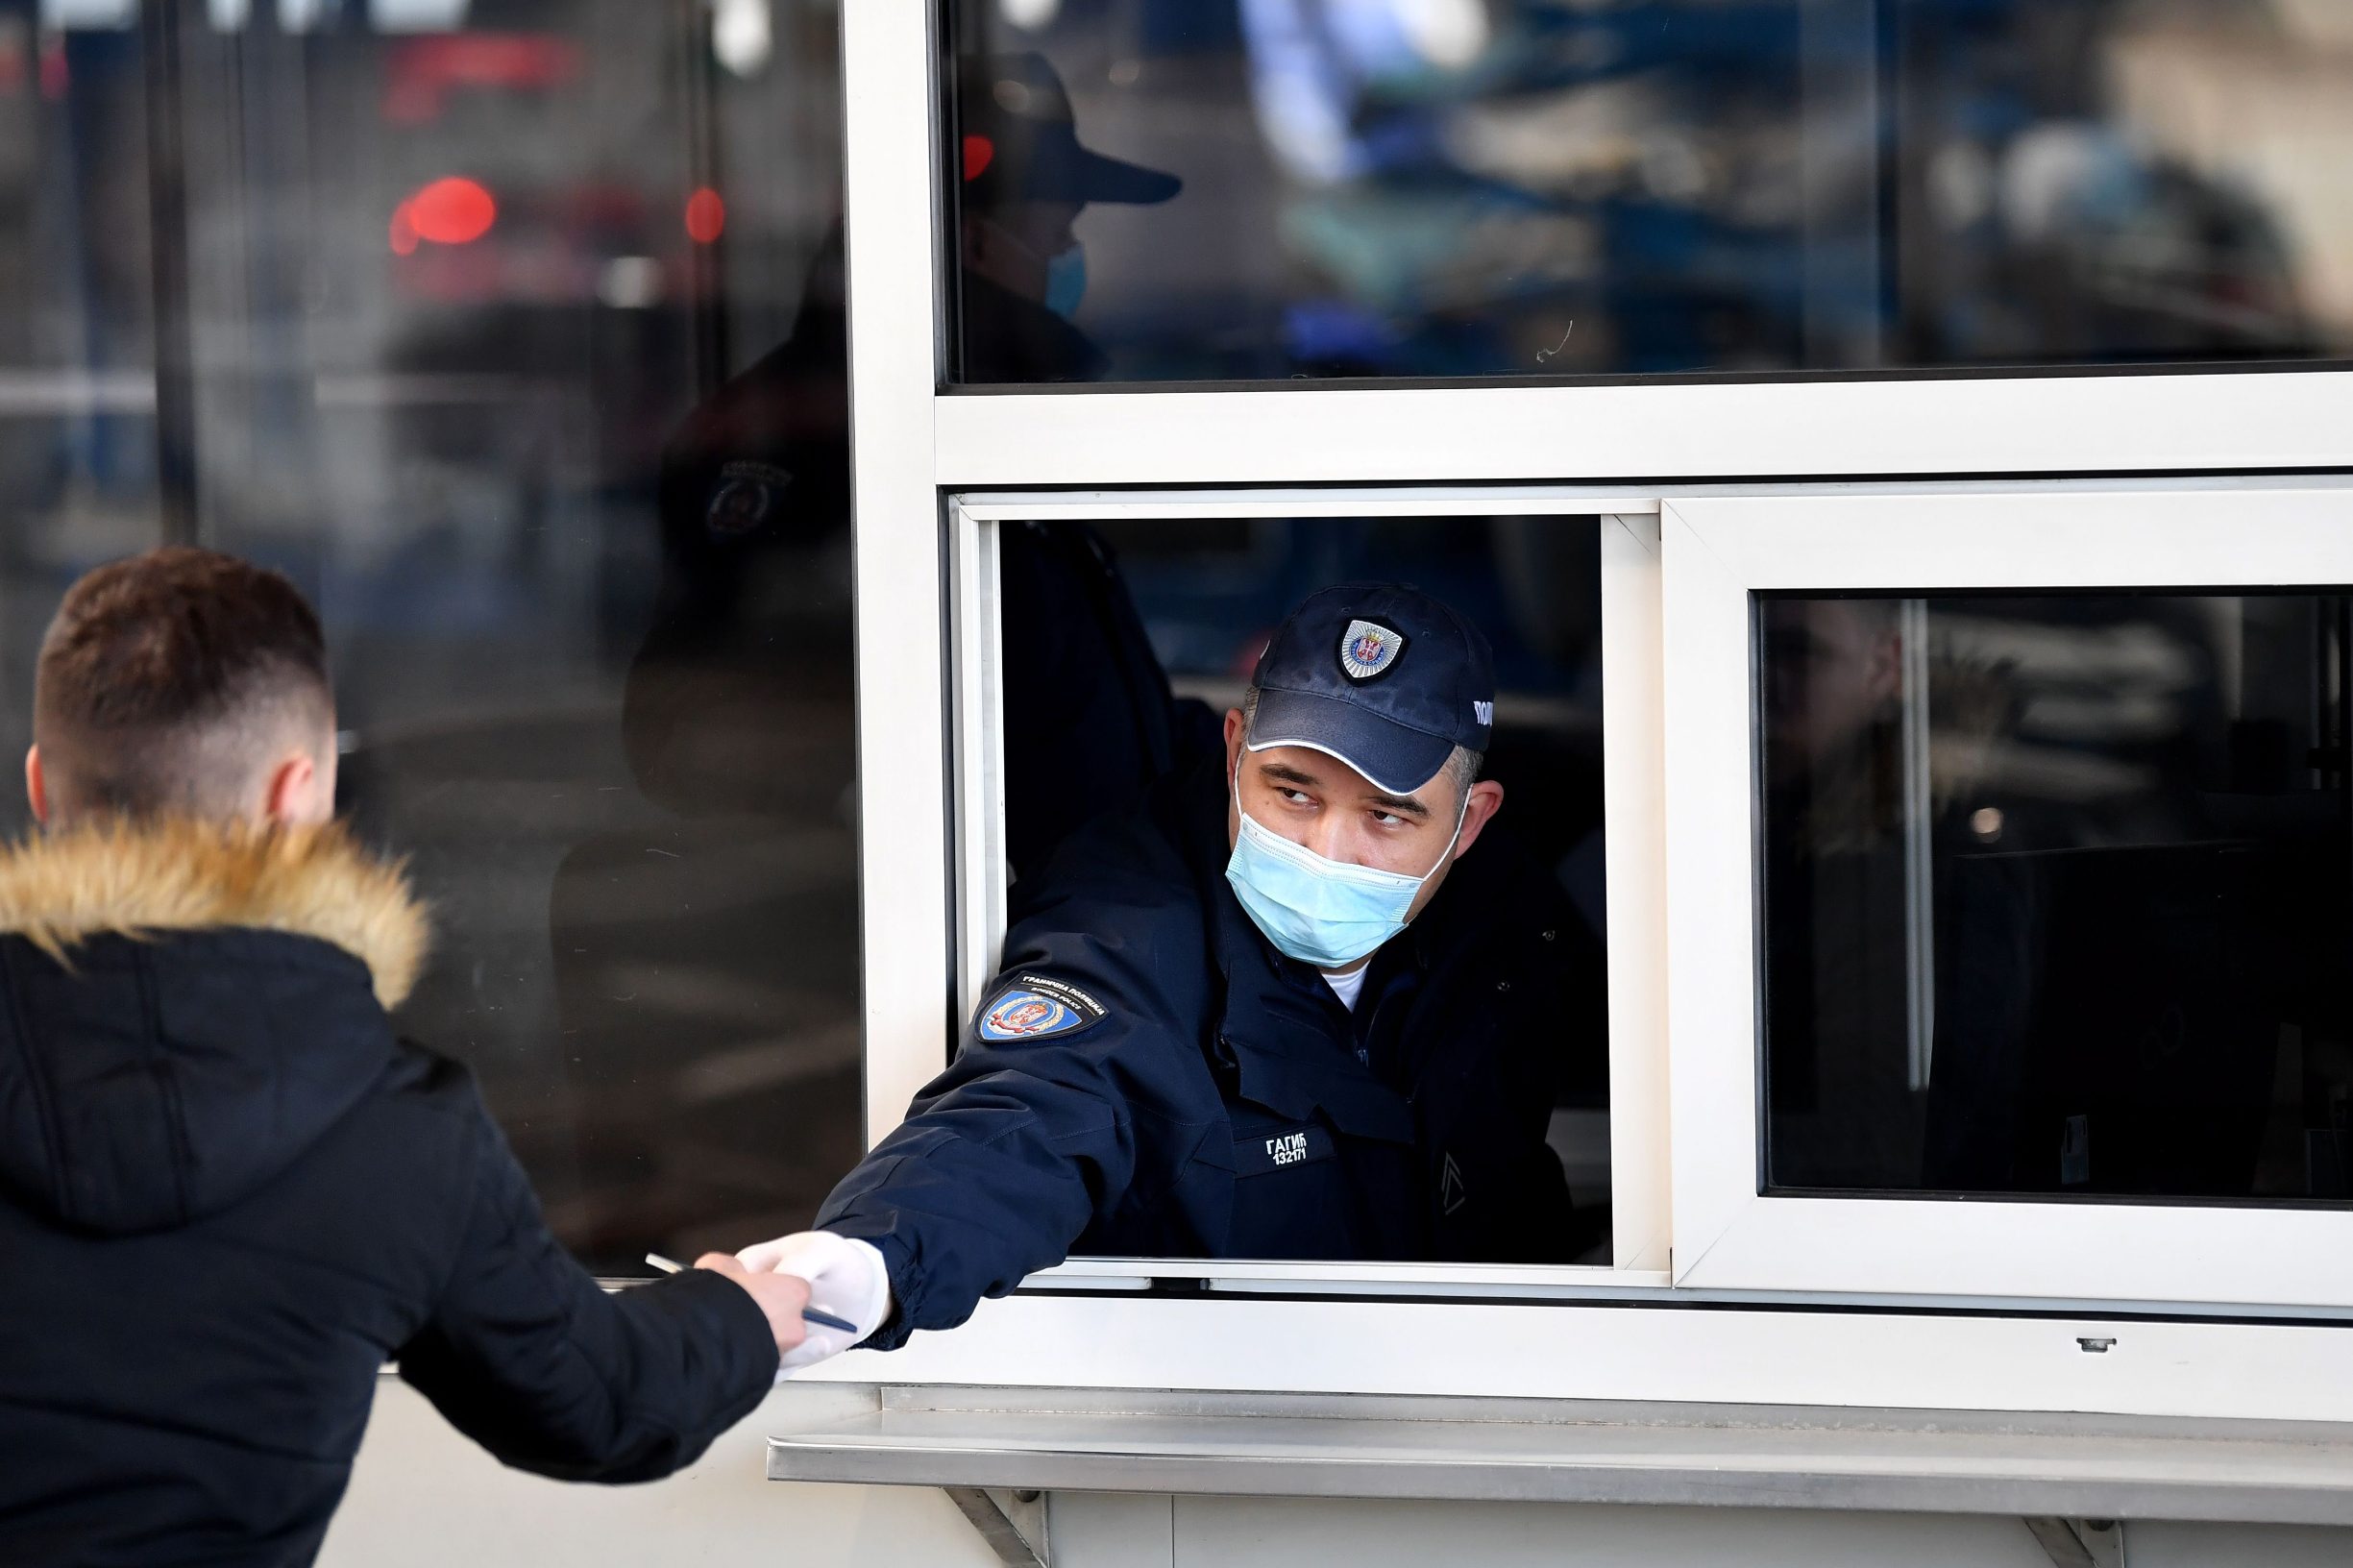 Serbian border police officer wearing a protective mask checks documents of a traveller on March 15, 2020, at the Batrovci border crossing between Serbia and Croatia. - Currently there are 46 positive cases of coronavirus COVID-19 in the Republic of Serbia. Serbian government temporarily prohibits the entry of foreign nationals arriving from countries particularly affected by the virus. Serbian nationals coming from the affected area go to a mandatory solitary confinement at home, under medical supervision, for 14 days. Previously indoor mass events are cancelled, and no spectators at sporting events. The government has 